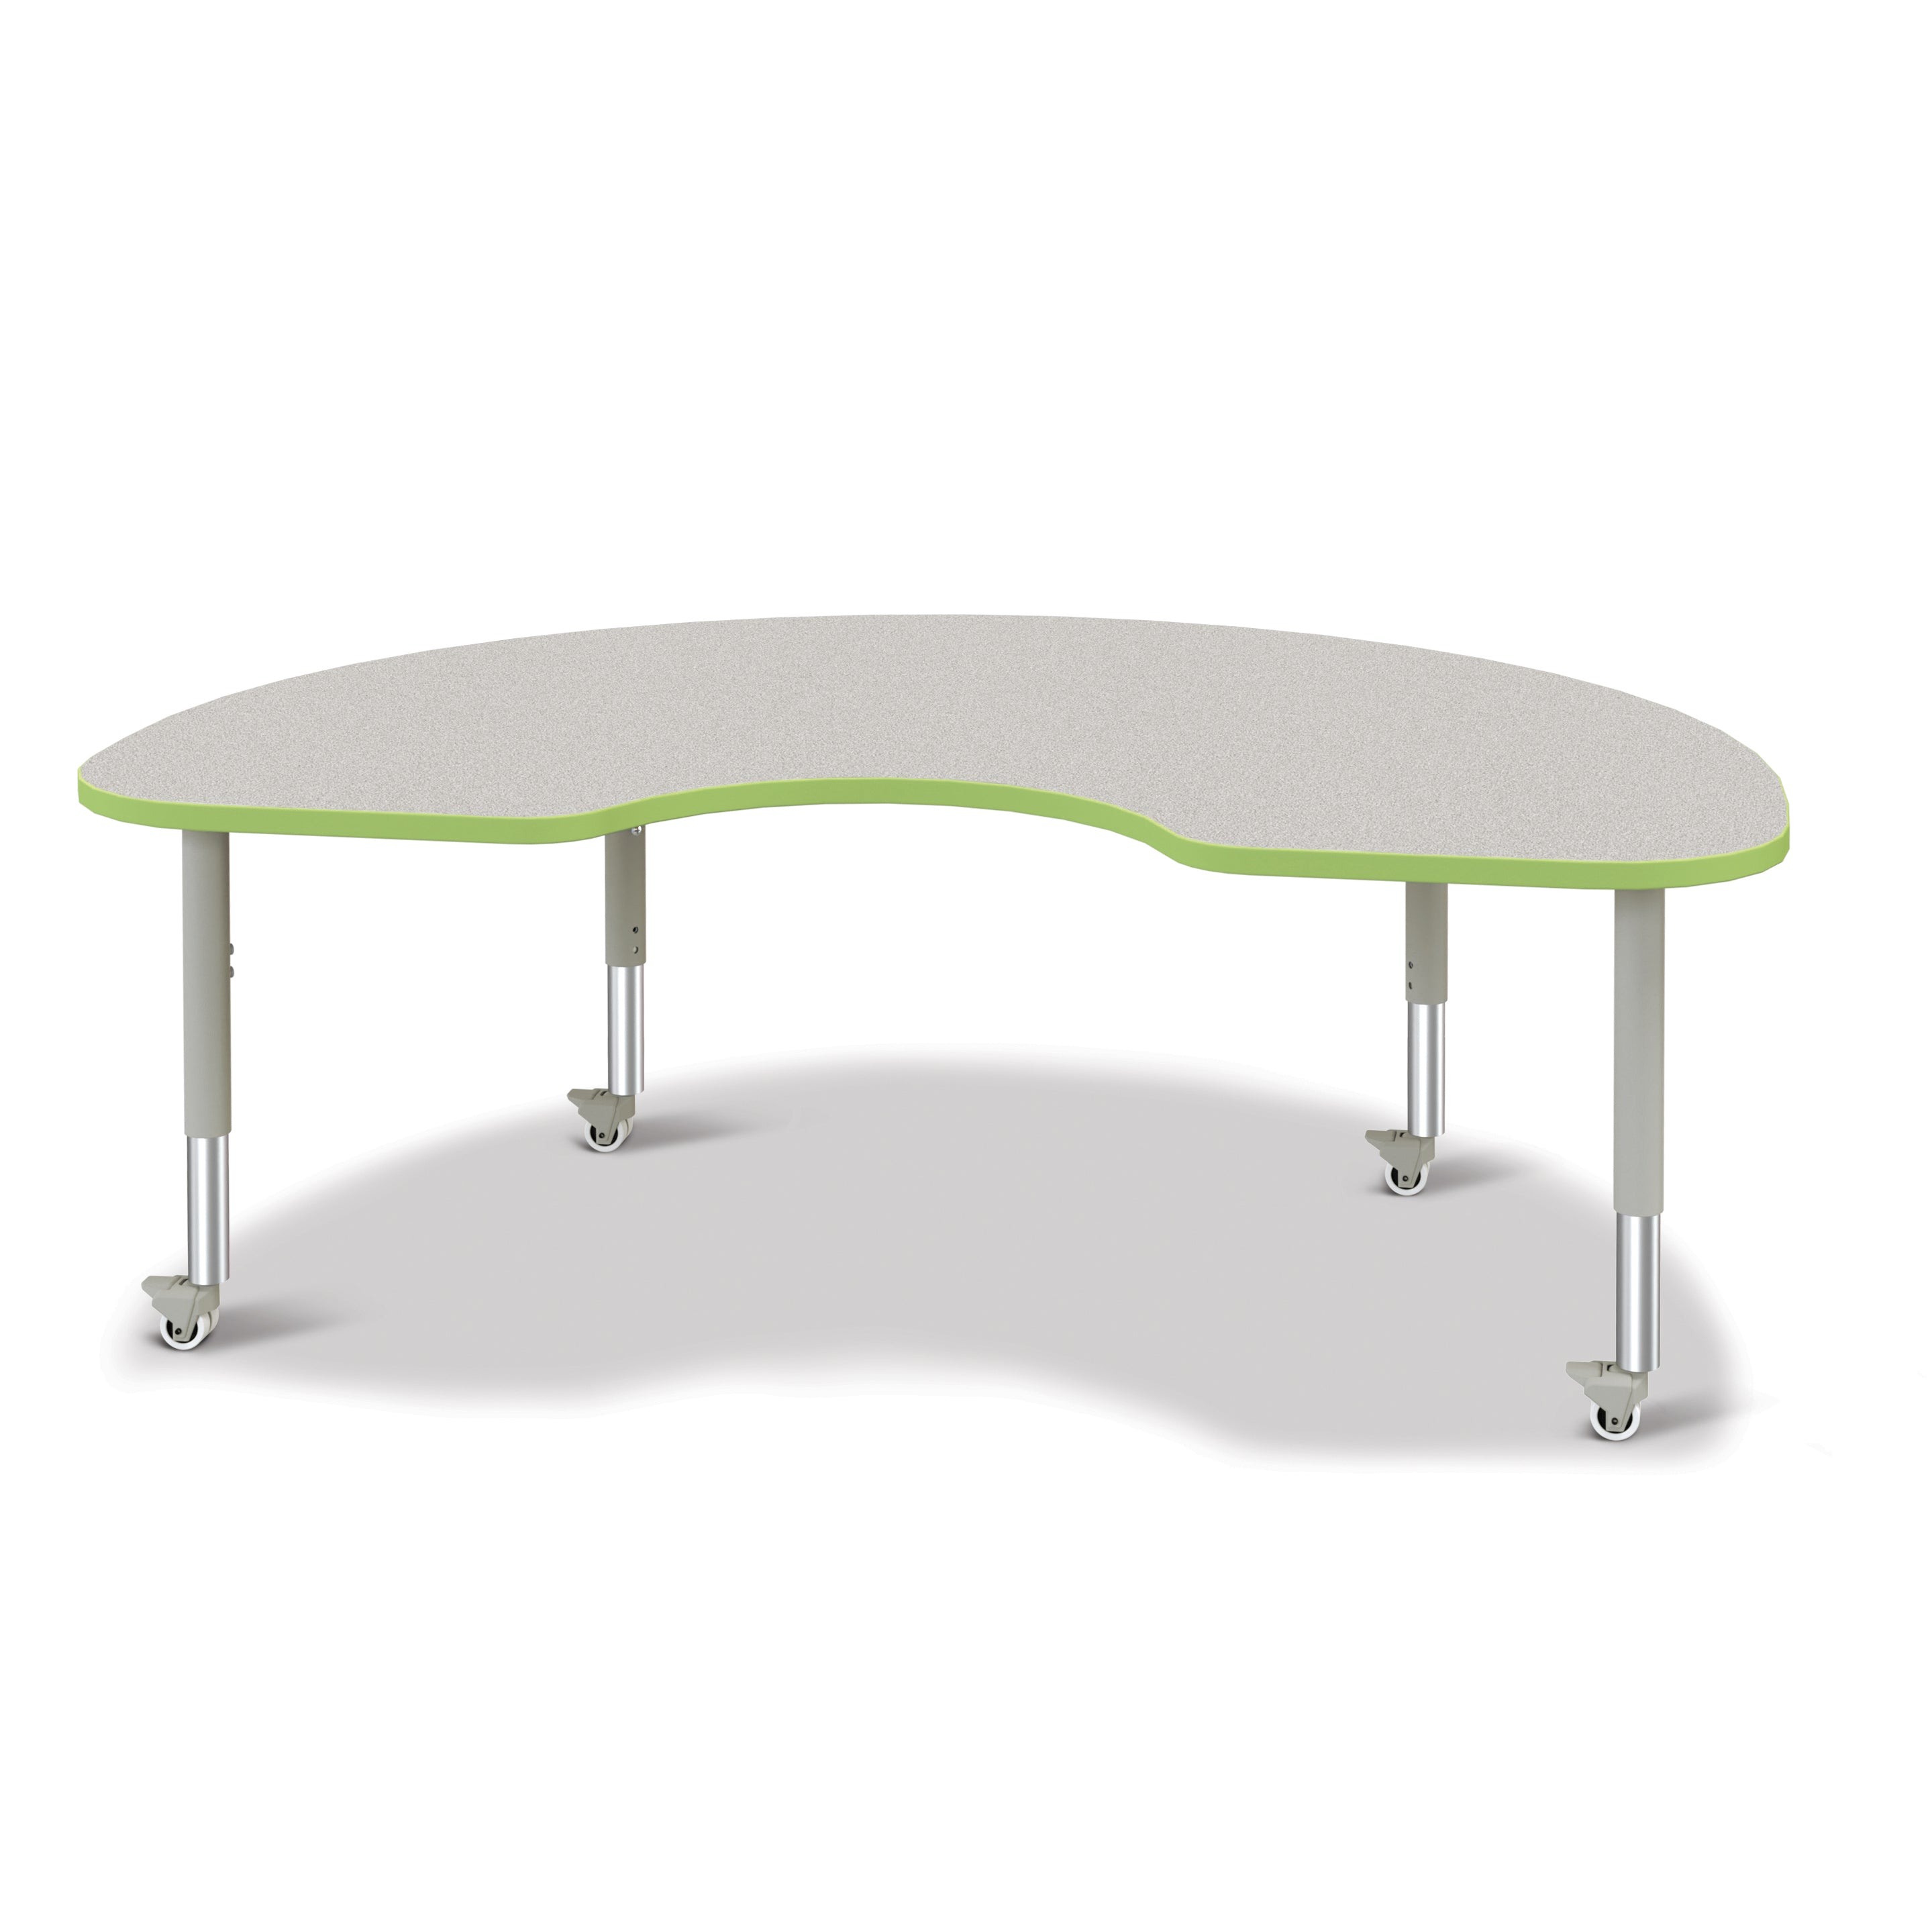 6423JCM130, Berries Kidney Activity Table - 48" X 72", Mobile - Freckled Gray/Key Lime/Gray